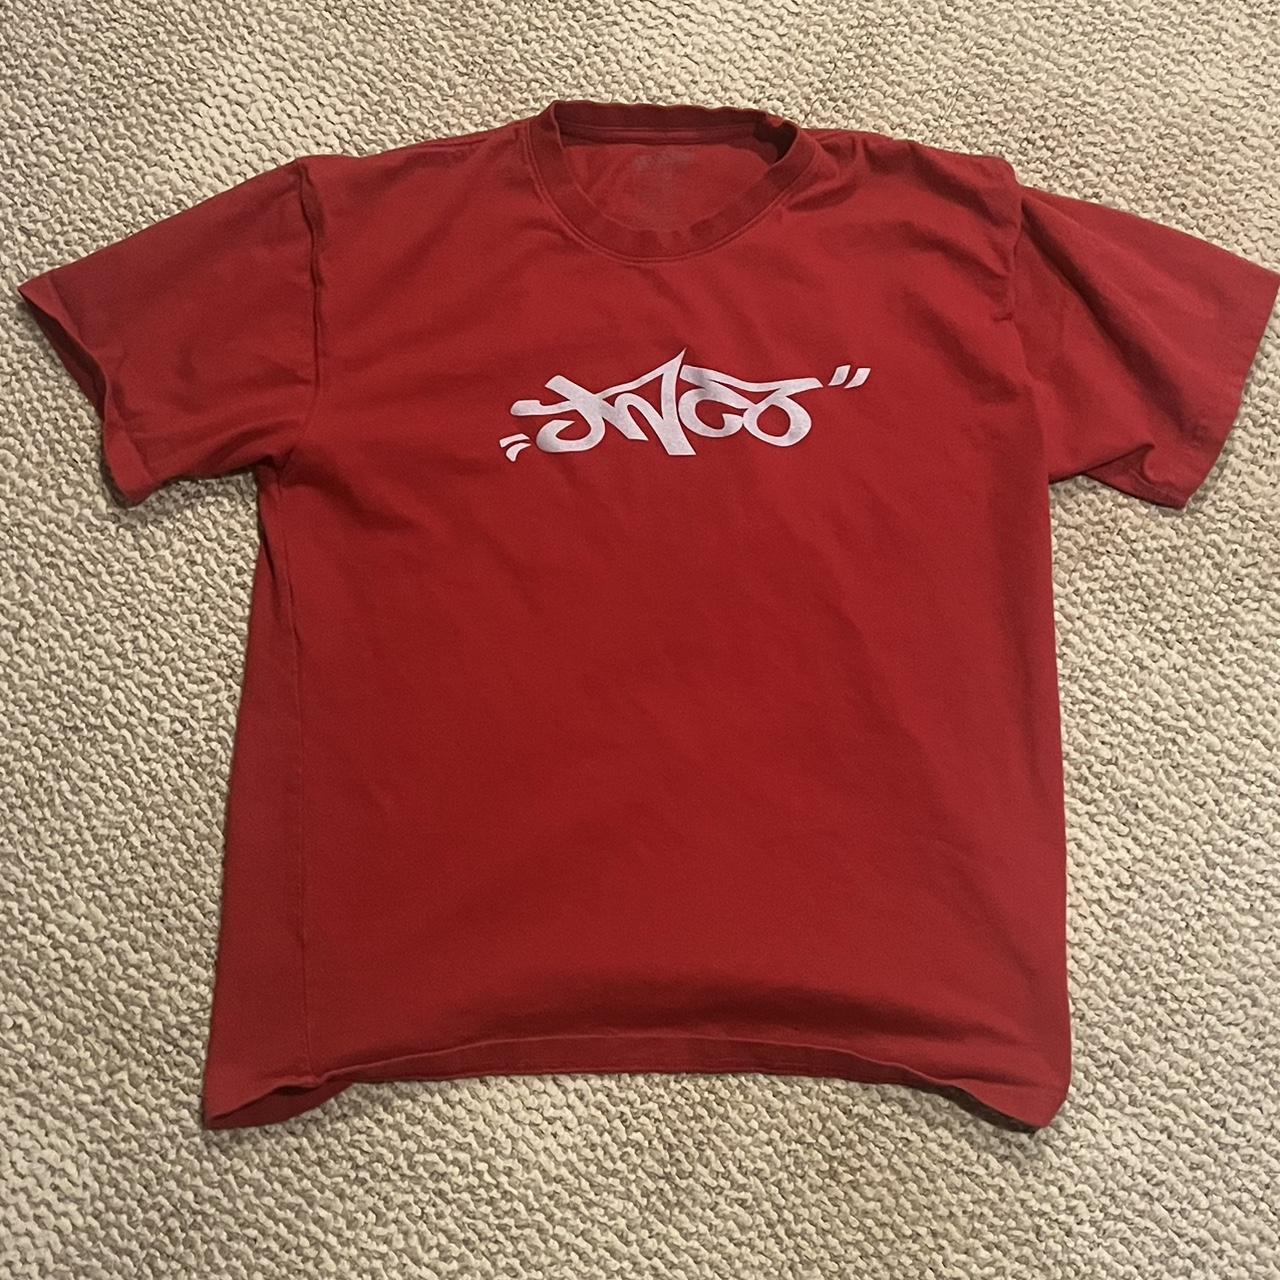 JNCO Men's Red and White T-shirt | Depop